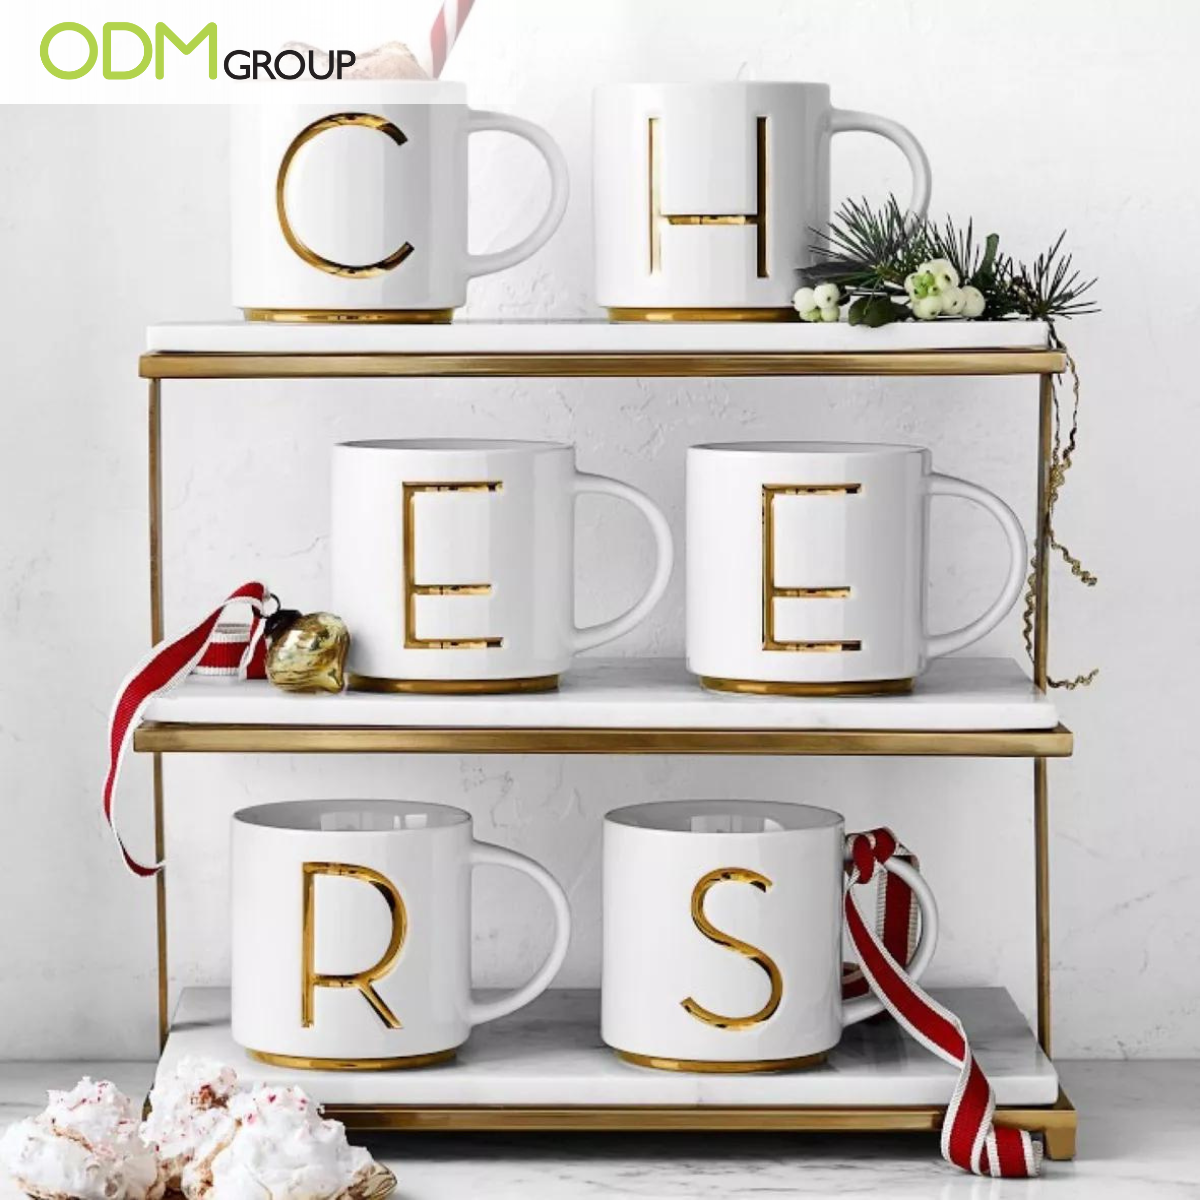 White ceramic mugs with gold monogram letters.